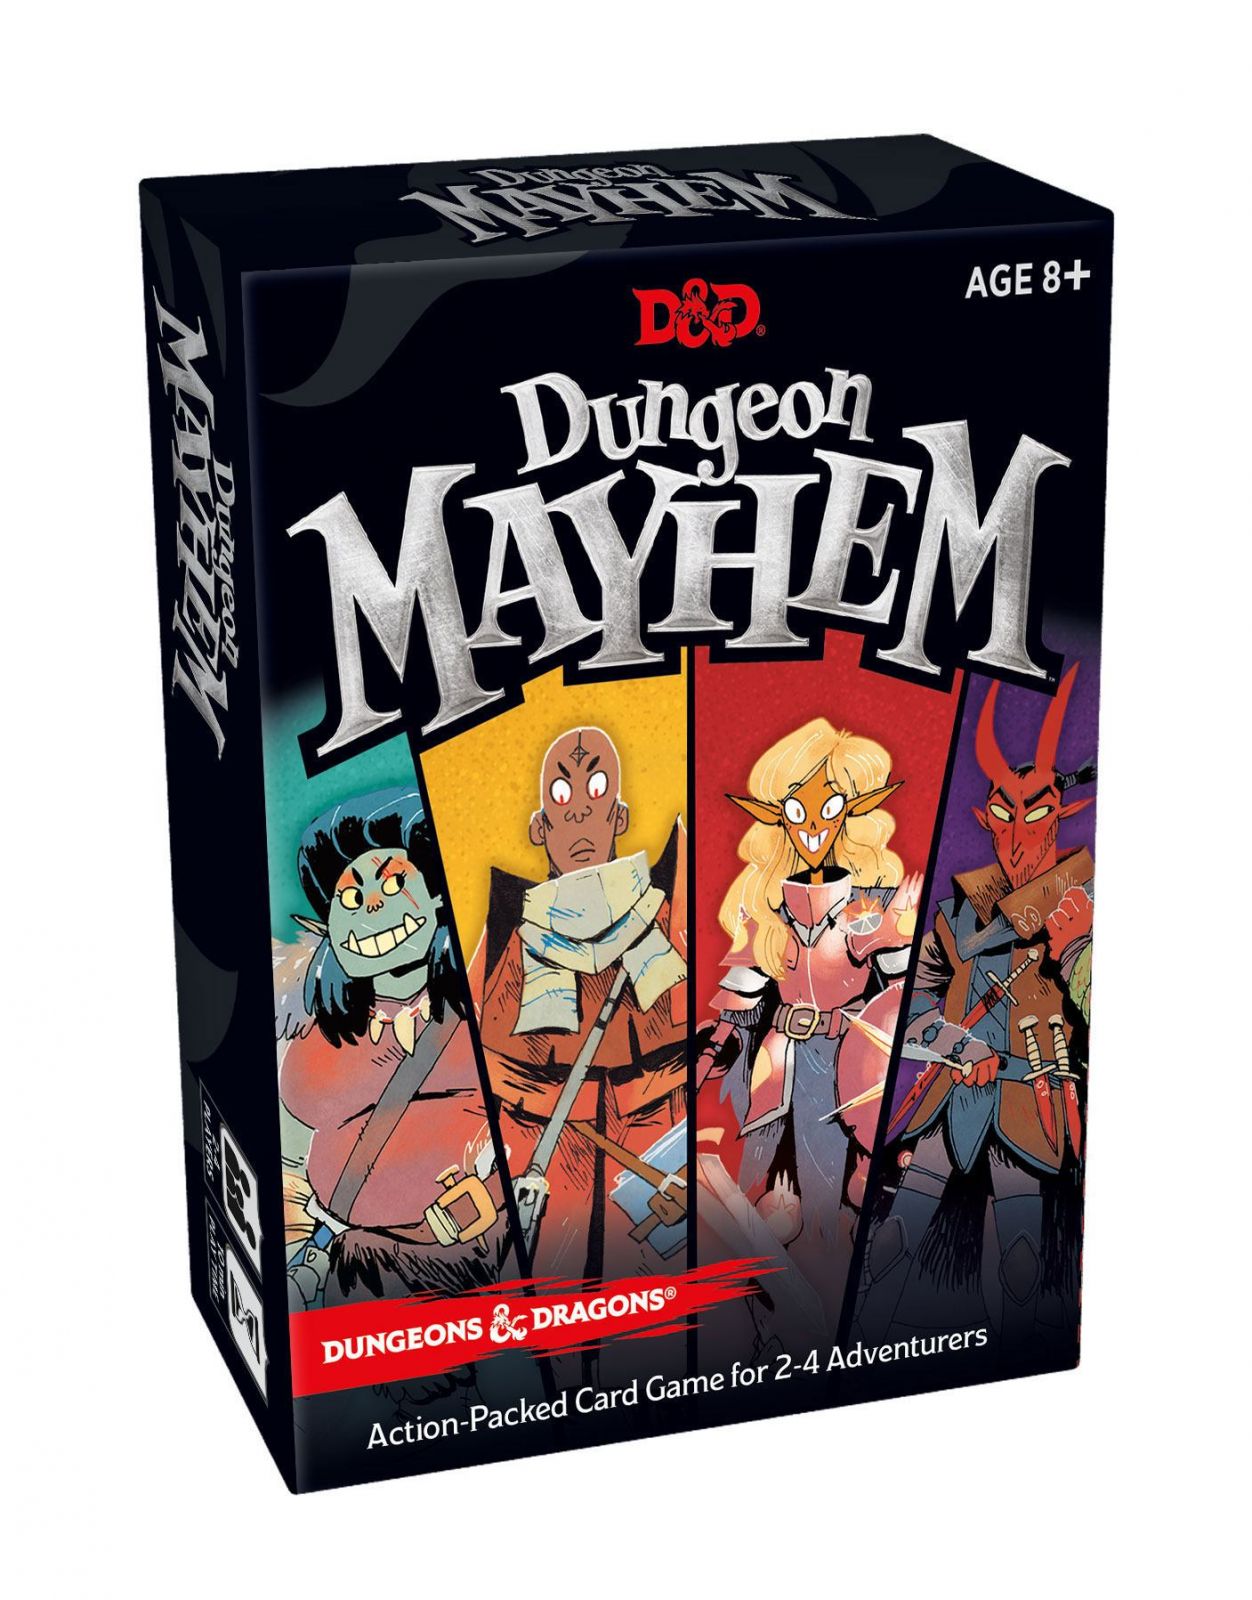 Dungeons & Dragons Card Game Dungeon Mayhem french Wizards of the Coast